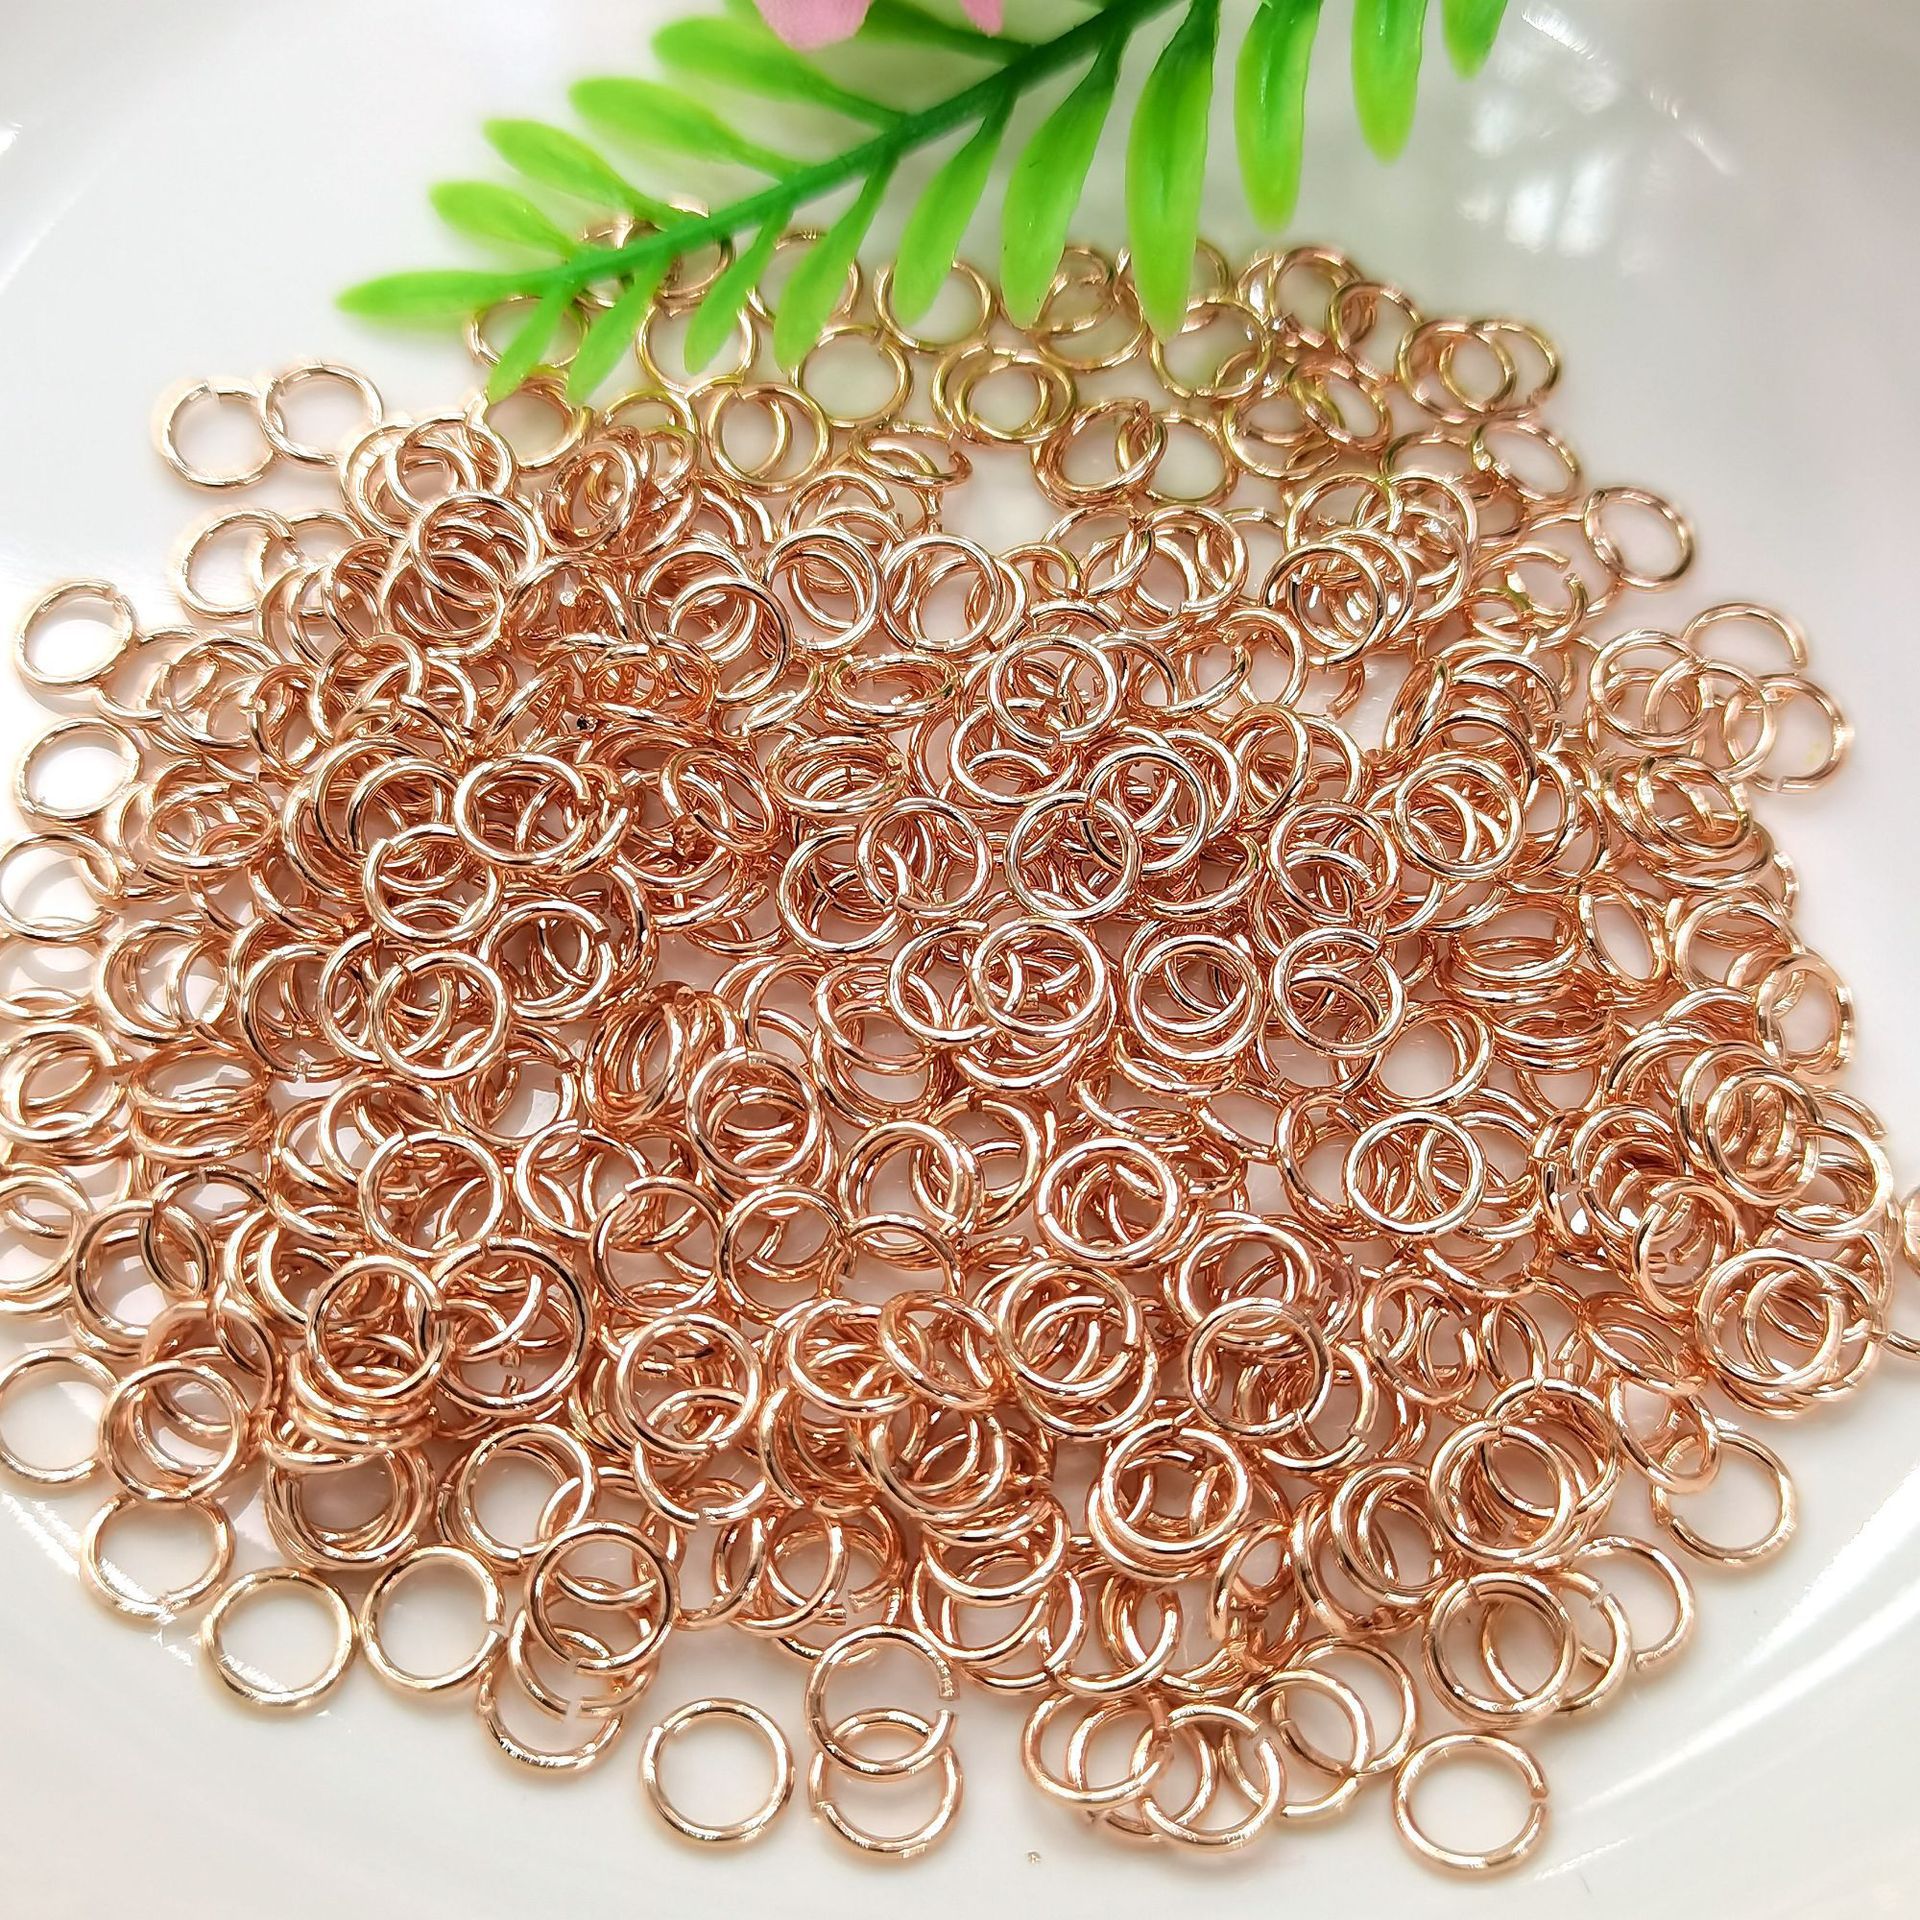 Rose gold 0.7*5mm (about 20 pieces per gram)